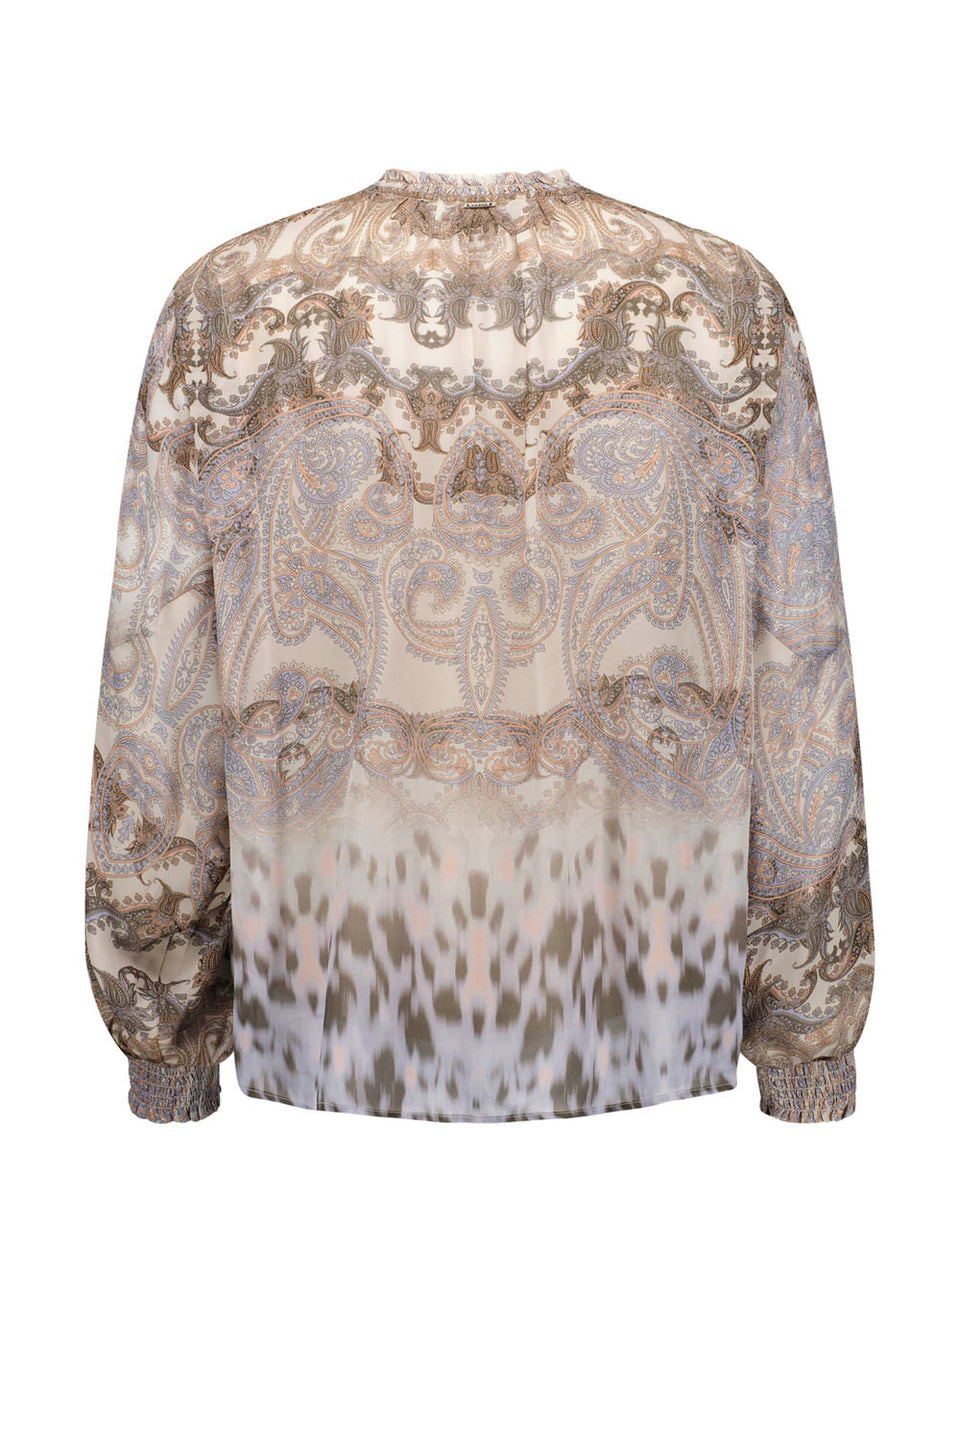 VERGE WIX BLOUSE - PRINT - THE VOGUE STORE